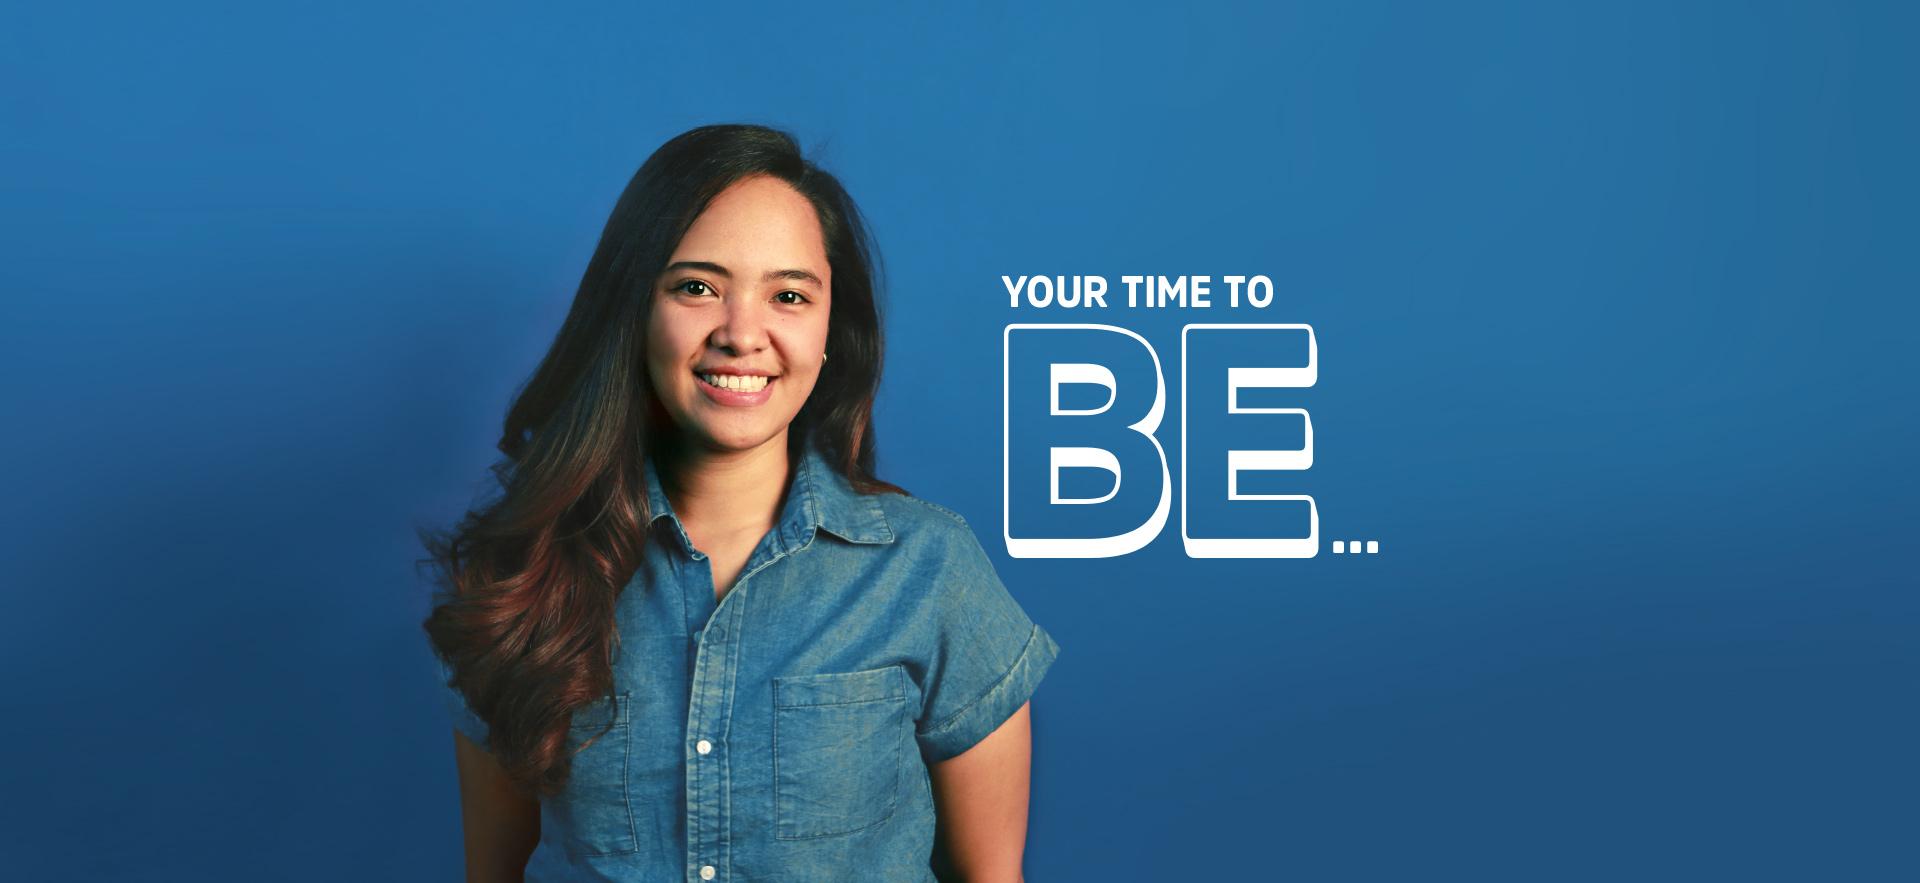 YOUR TIME TO BE text overlay beside student smiling at camera with blue background